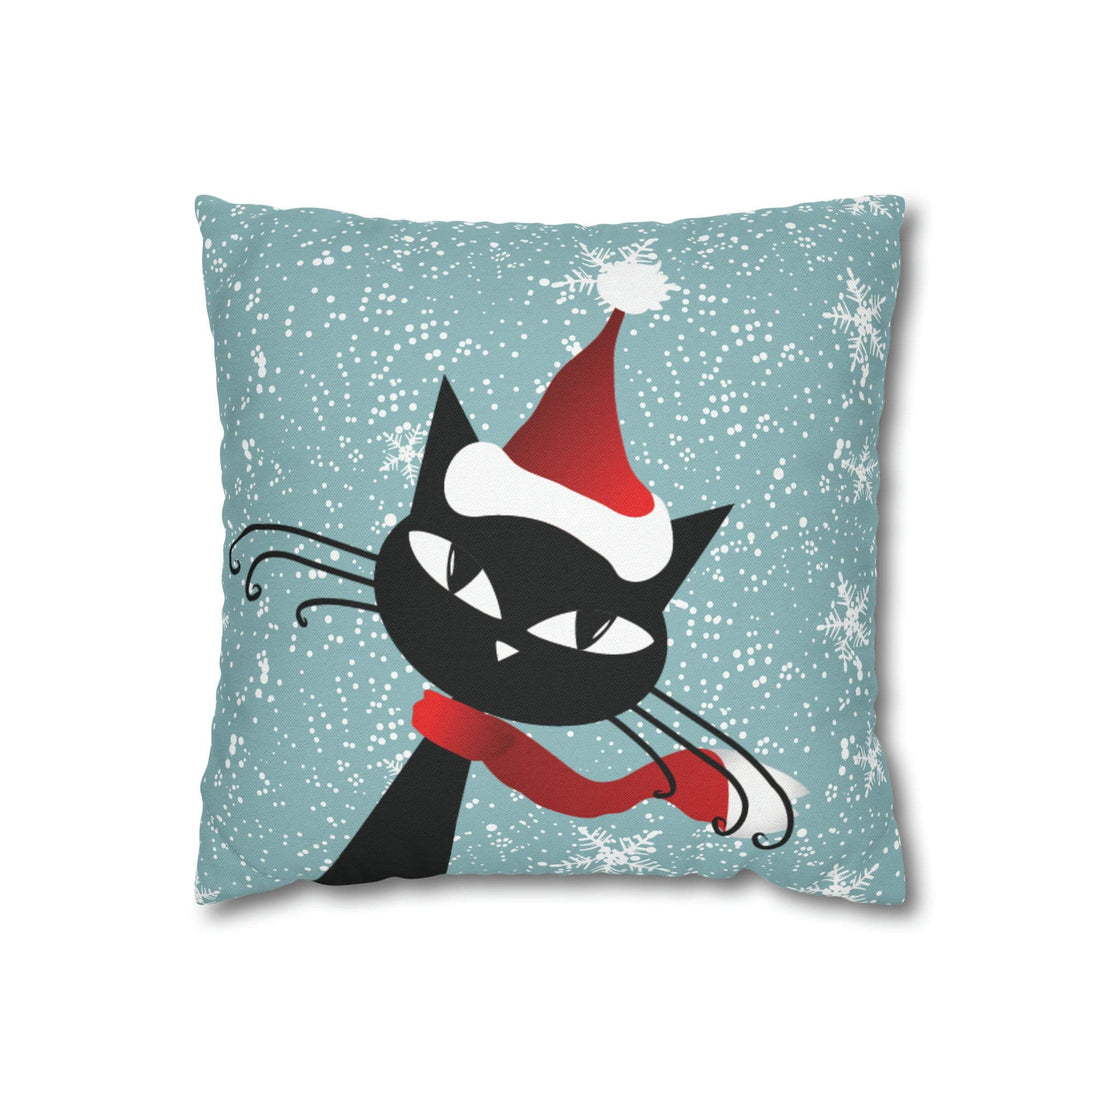 Kate McEnroe New York Retro Atomic Cat Snowflakes Pillow Cover, Mid Century Modern Blue Holiday Cushion Covers, MCM Pillow Case Throw Pillow Covers